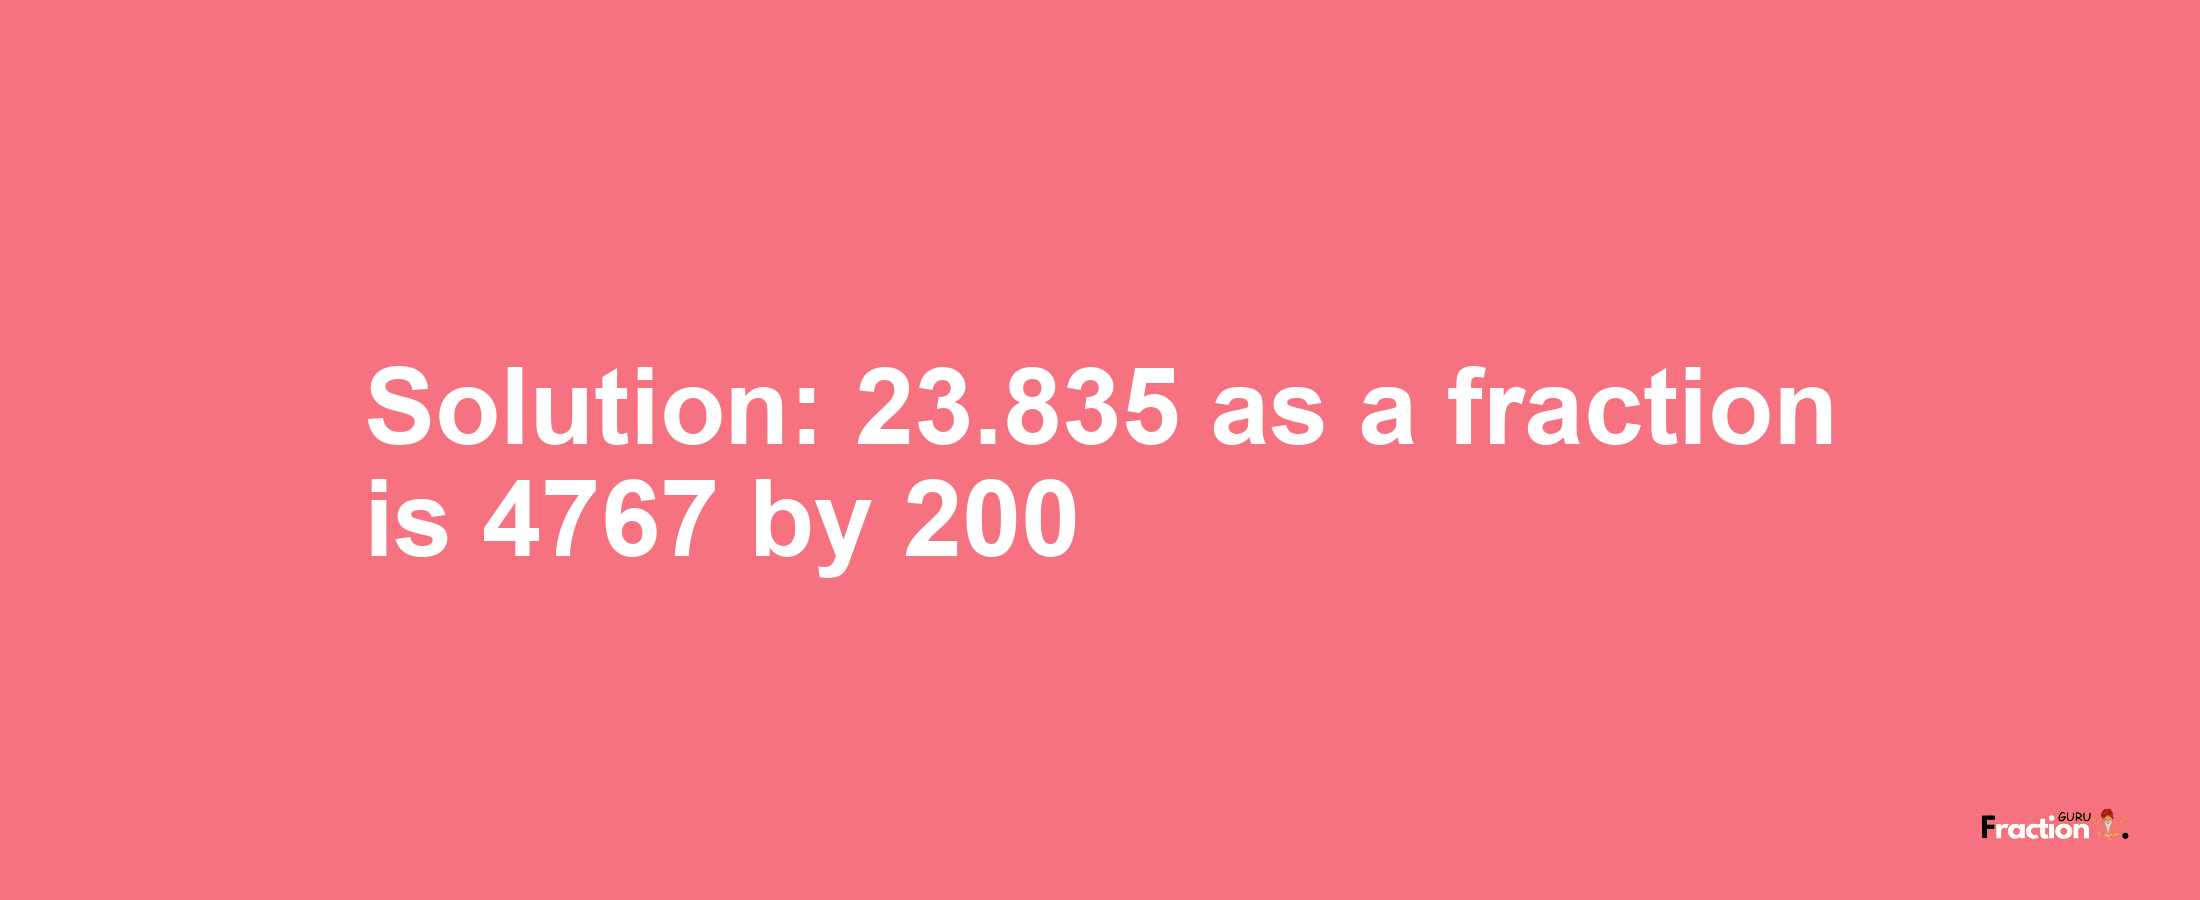 Solution:23.835 as a fraction is 4767/200